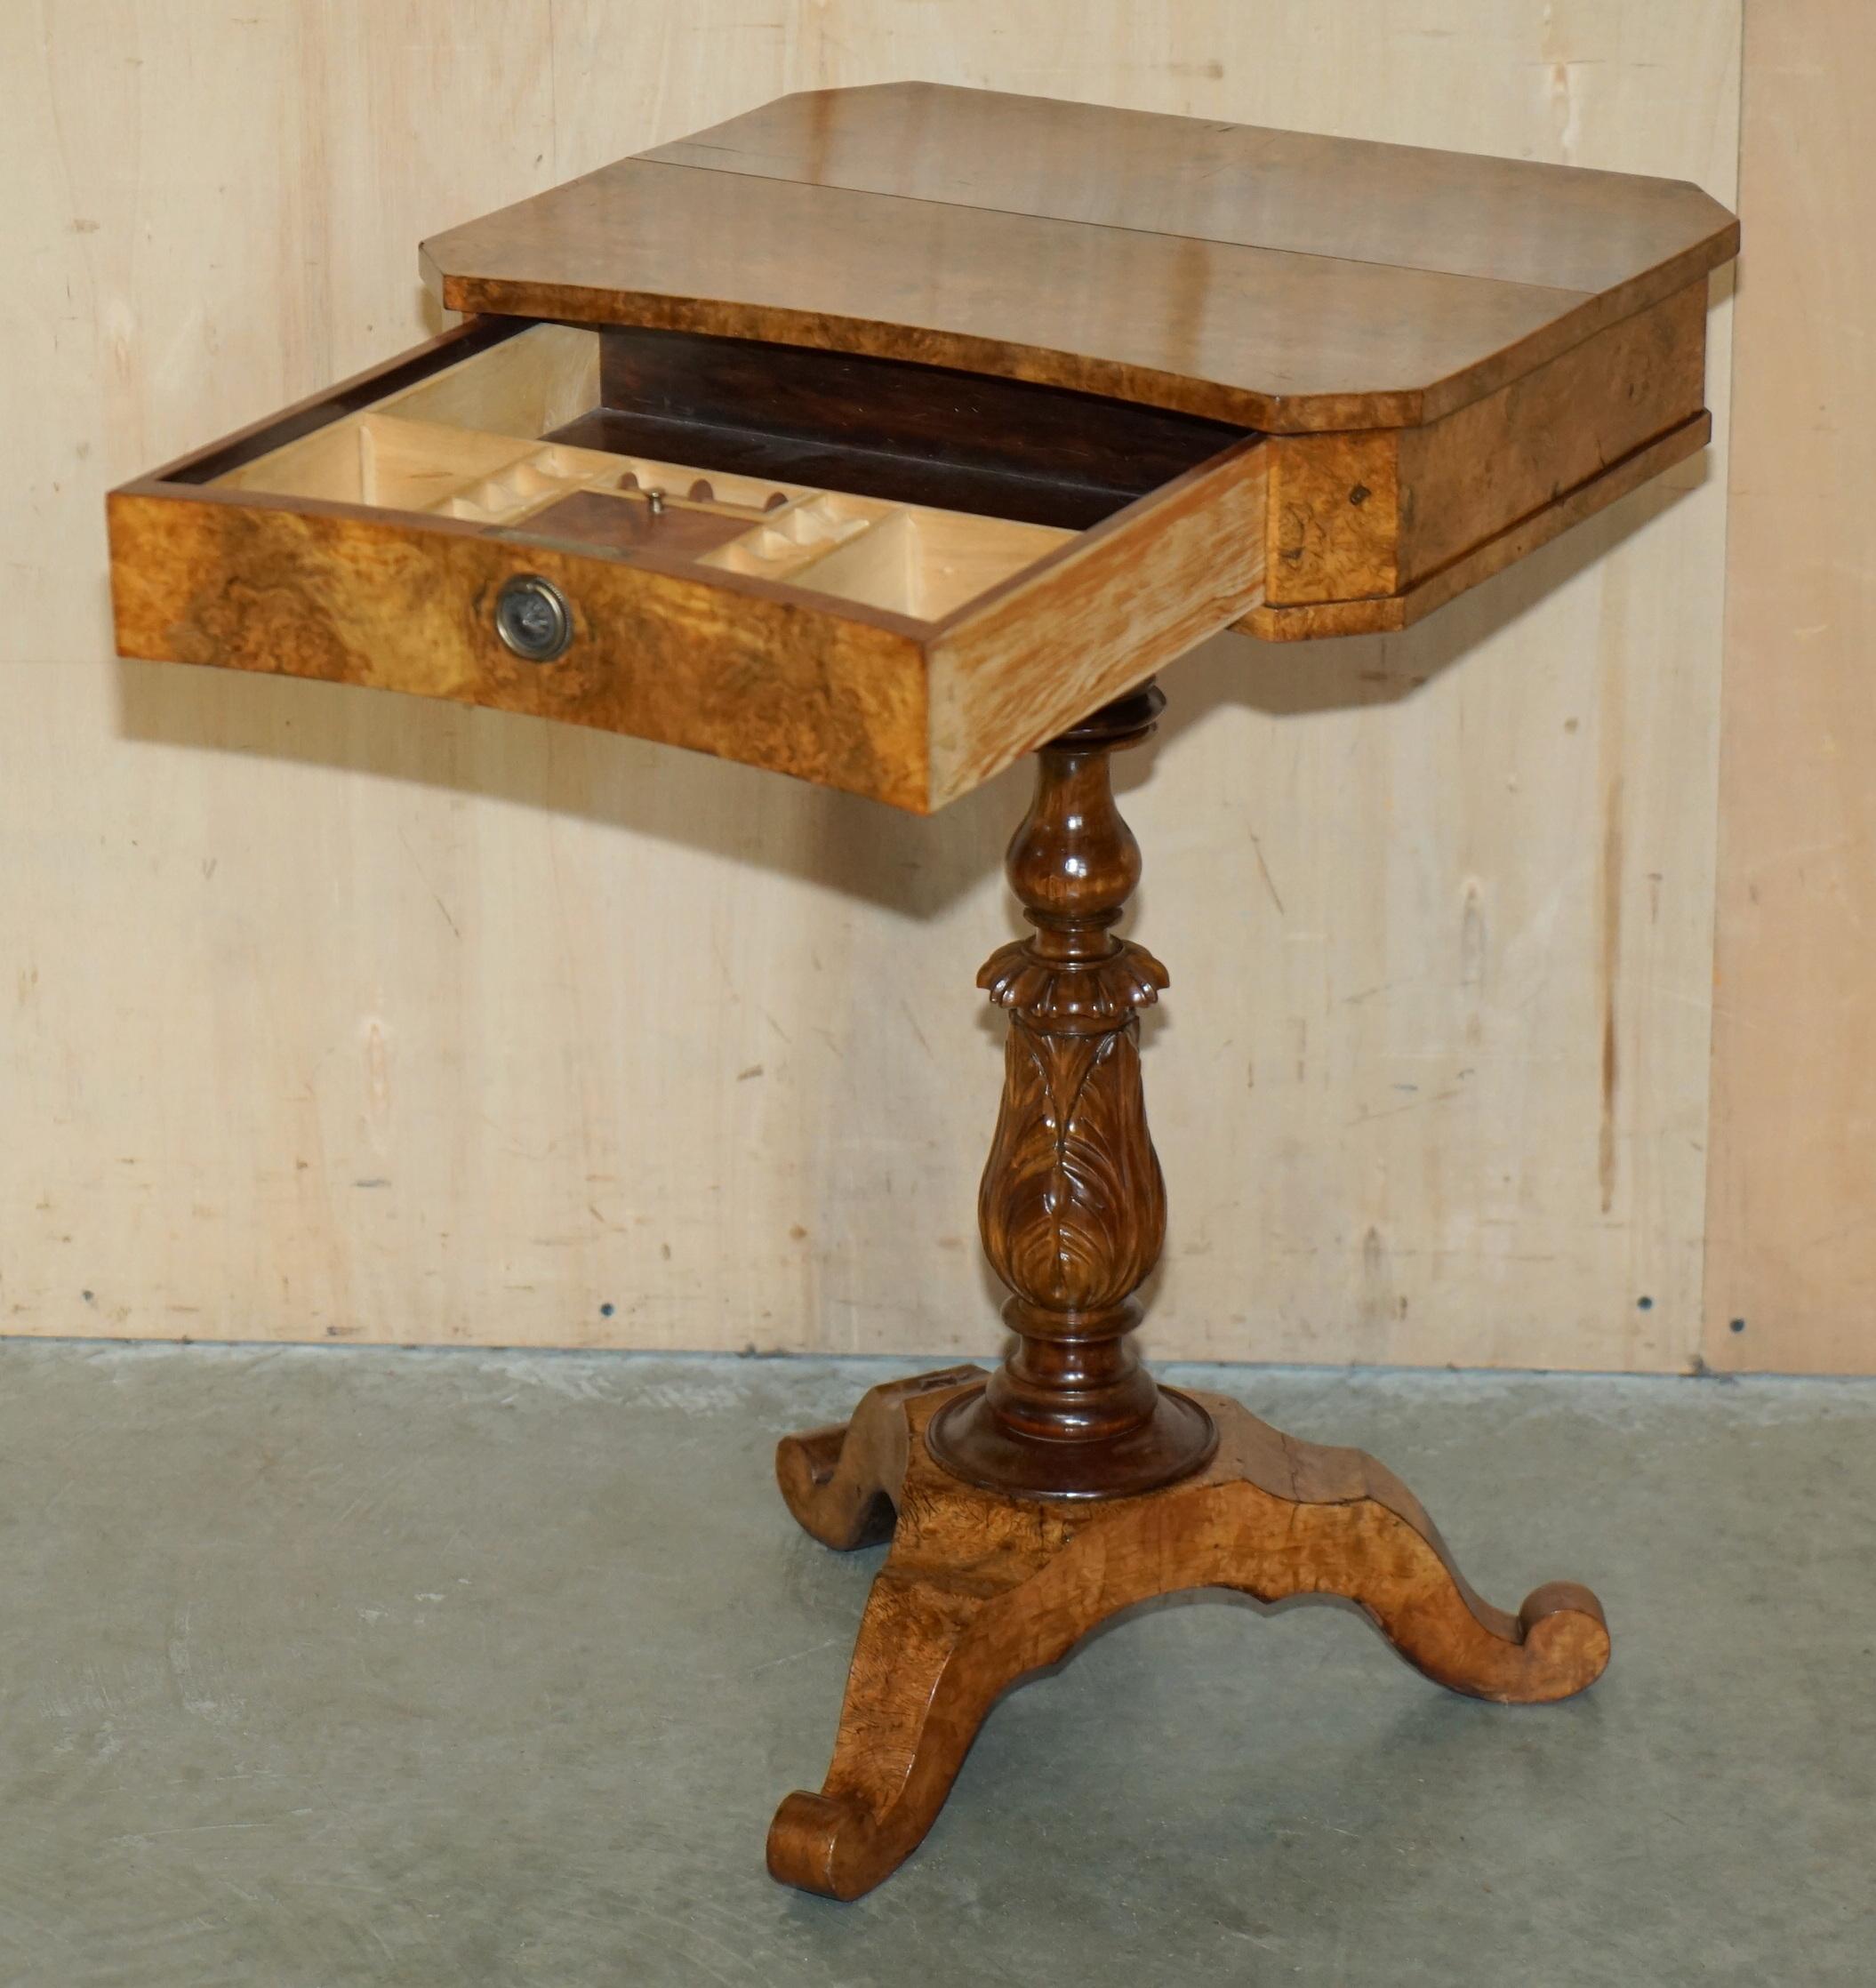 EXQUISITE QUALITY WILLIAM IV CIRCA 1830 BURR WALNUT SiDE END WORK SEWING TABLE For Sale 12